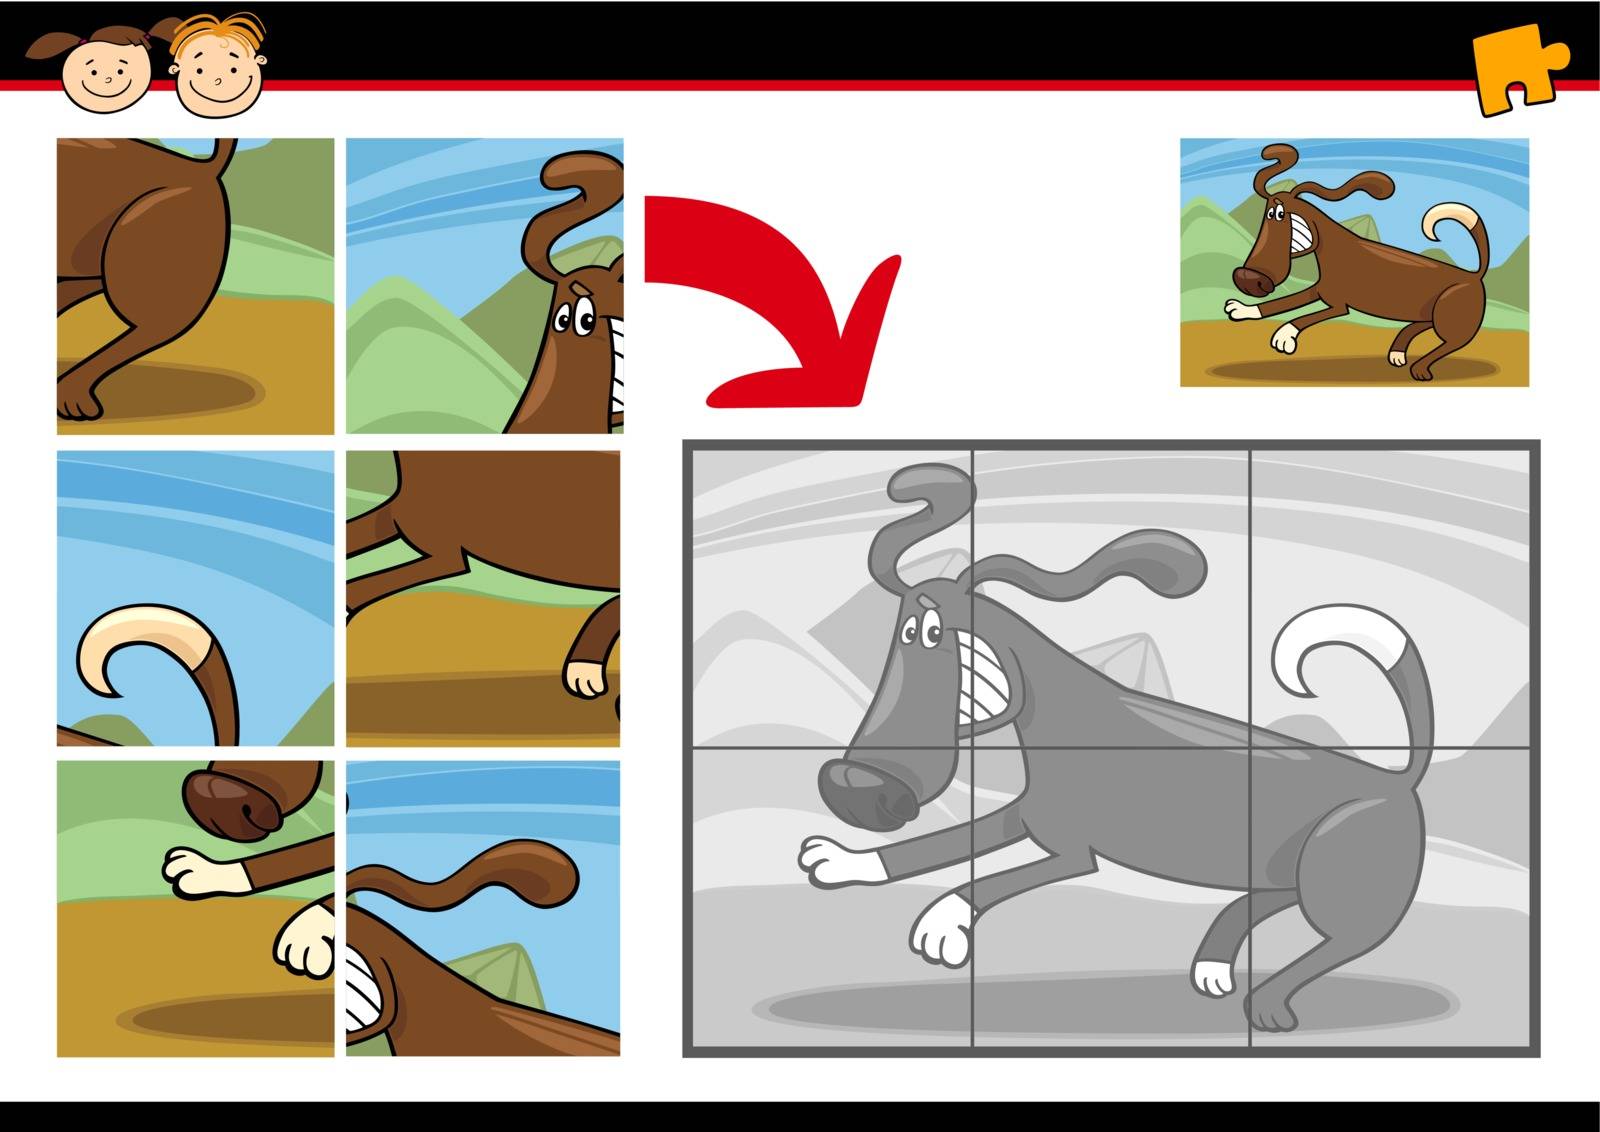 Cartoon Illustration of Education Jigsaw Puzzle Game for Preschool Children with Funny Dog